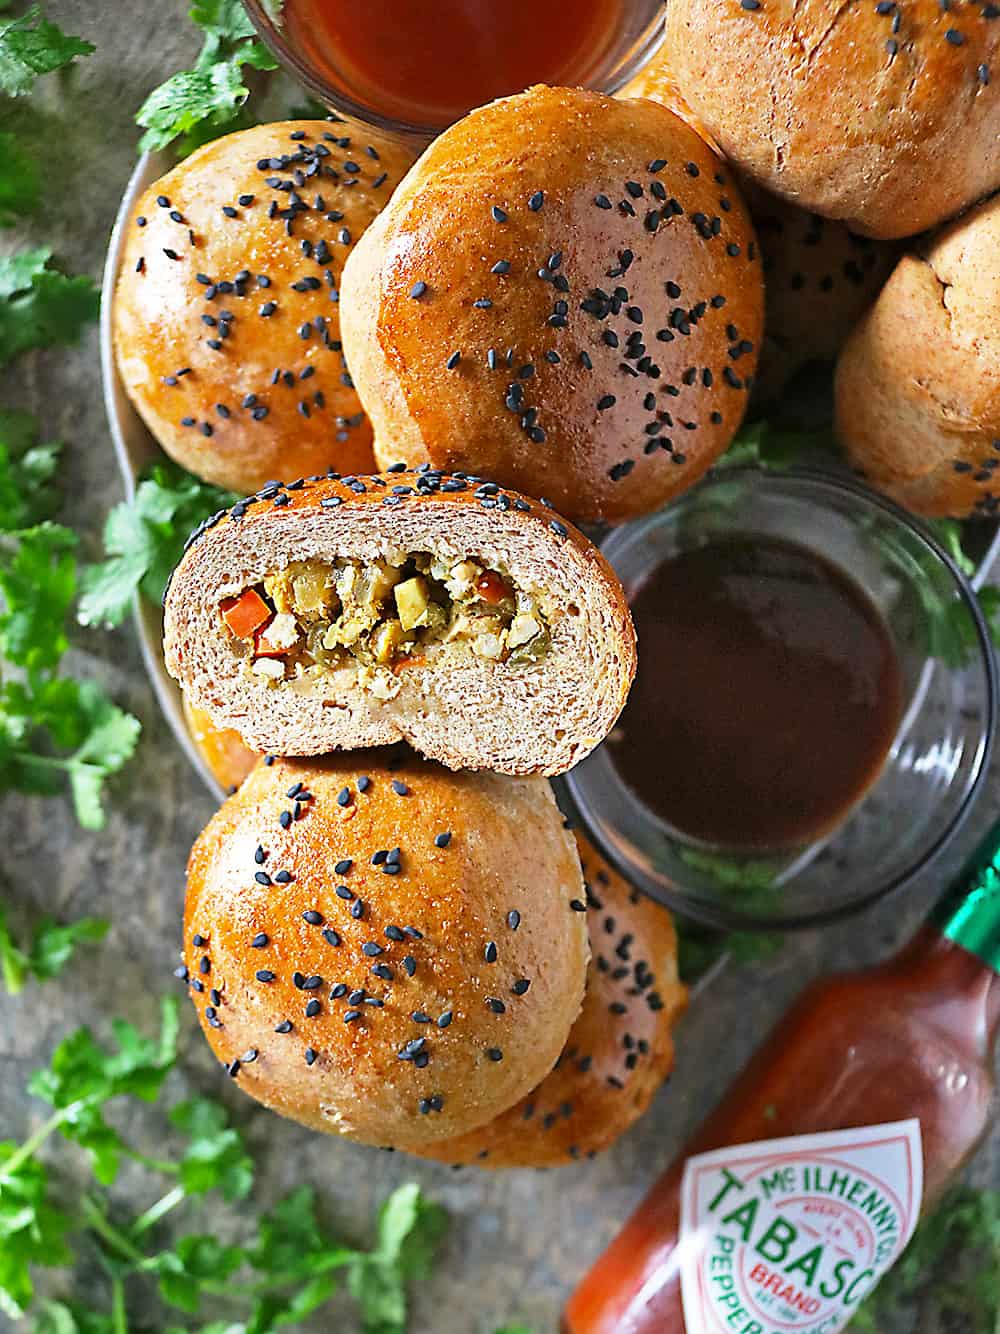 Tabasco As An Ingredient and Condiment In Curried Chicken Stuffed Buns Photo